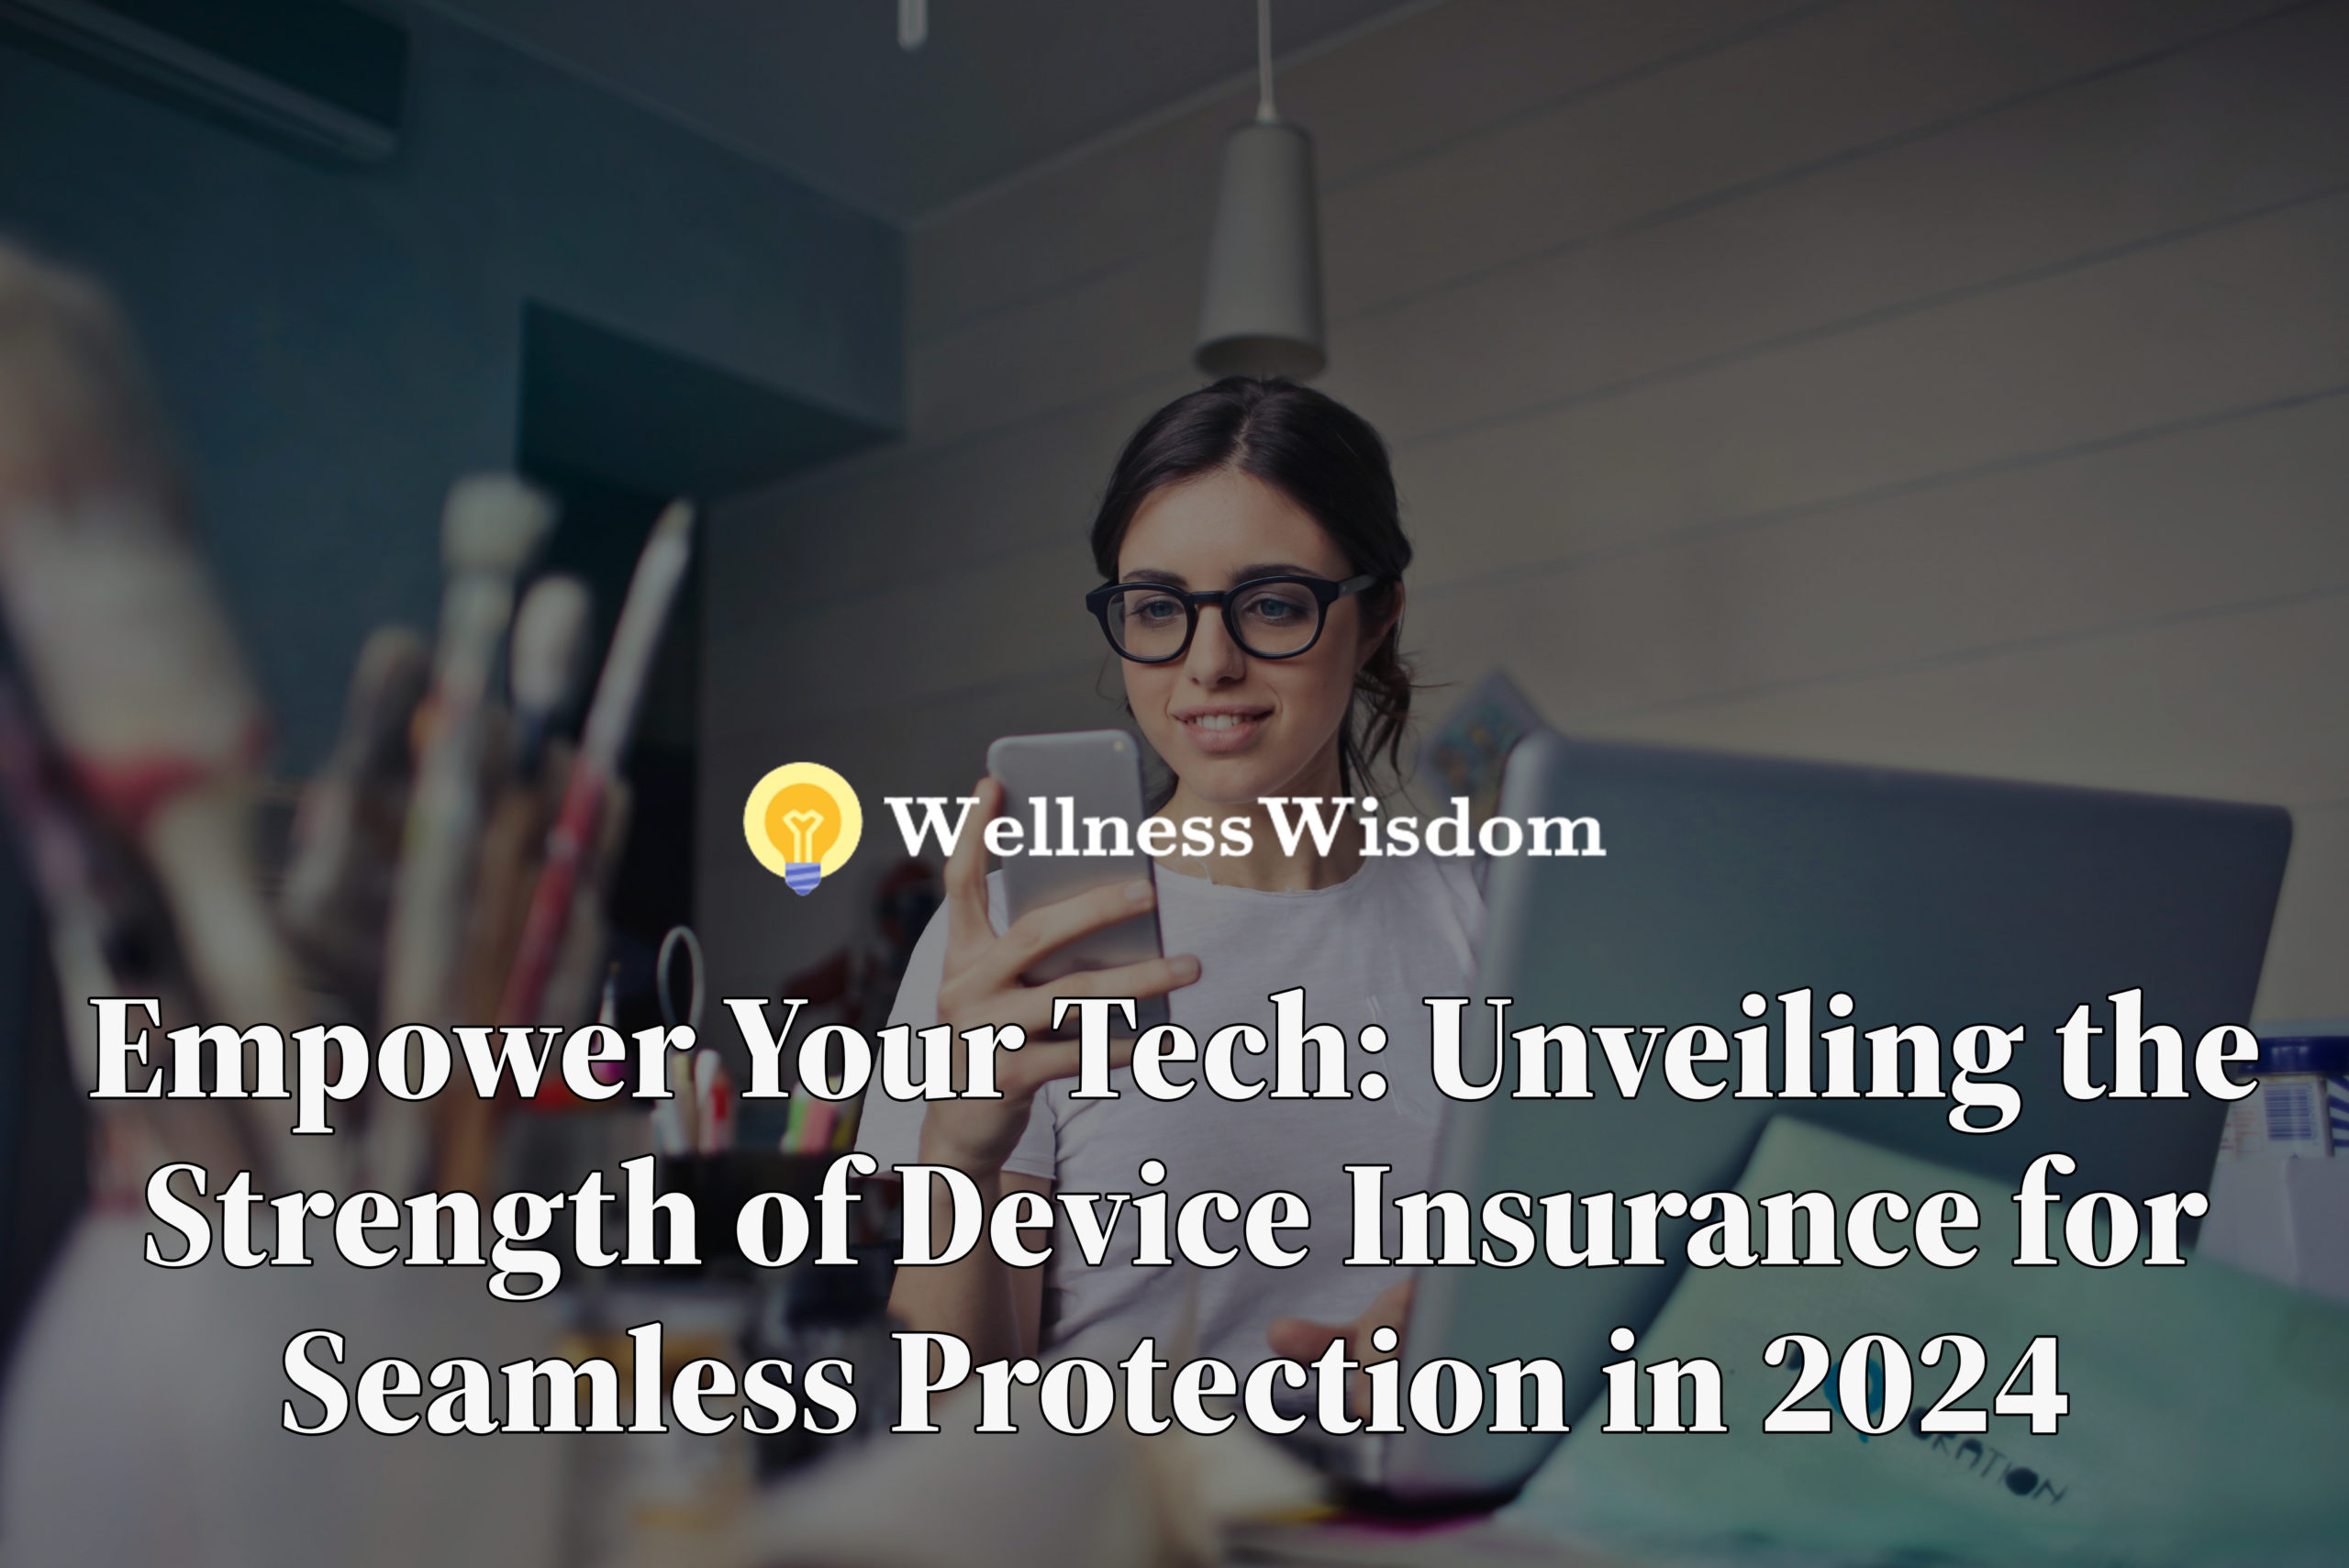 Device insurance, Gadget insurance, Electronic device protection, Tech insurance, Financial protection, Peace of mind, Seamless replacement, Coverage options, Value protection, Claim process, Additional benefits, Technology investment, Device security, Tech support.